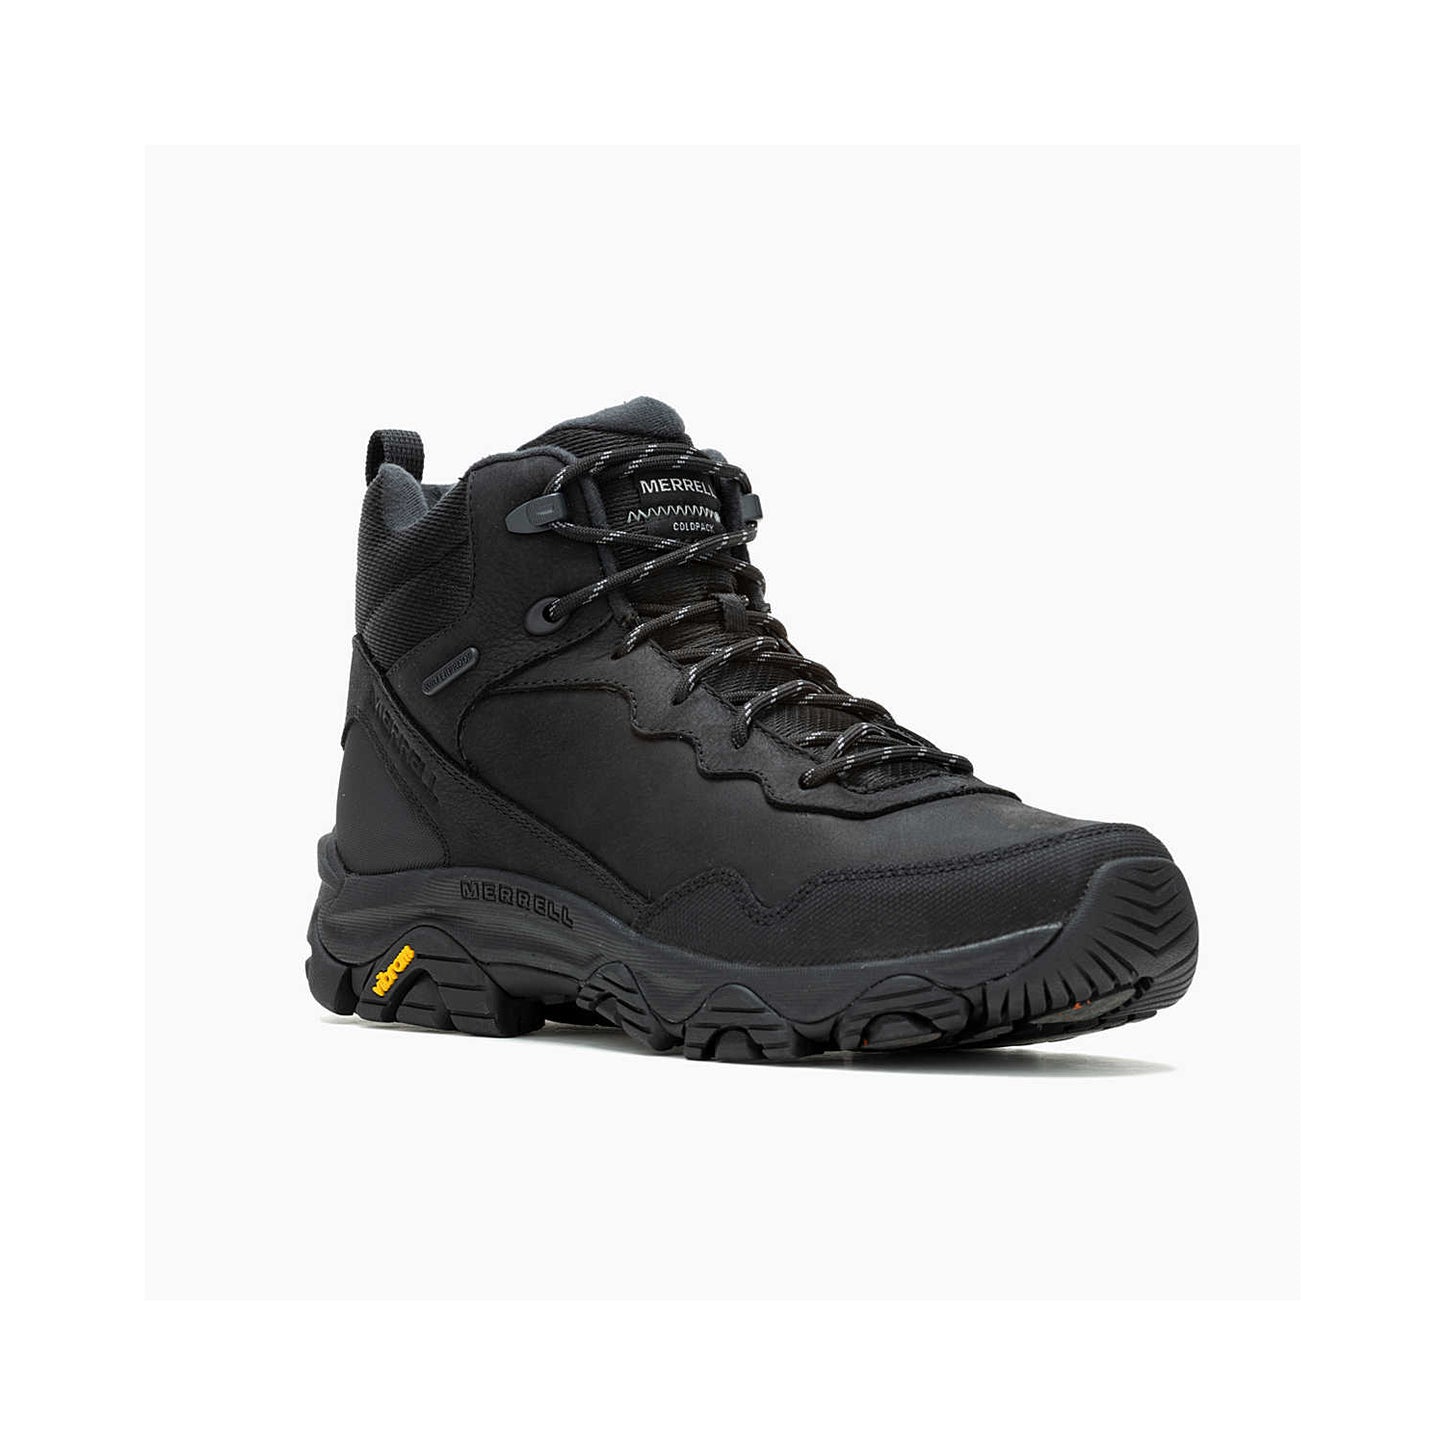 Merrell - Coldpack 3 Thermo Mid Waterproof - Black Leather